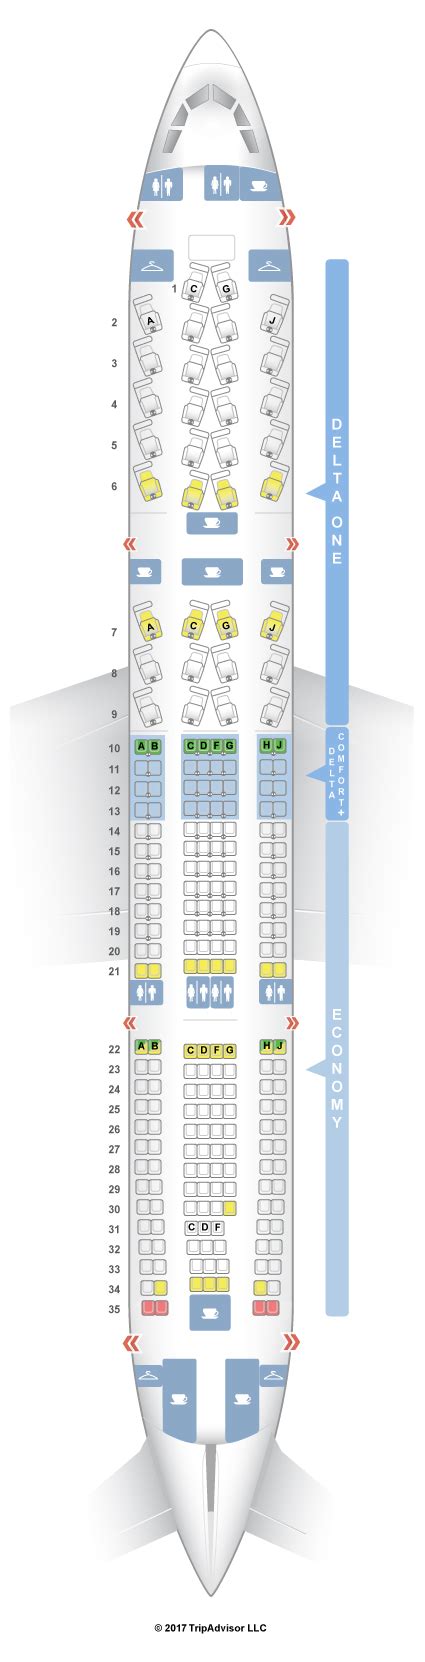 Seatlink's take. The Iberia Airbus A330-200 features seats in a 2 cabin configuration. Economy has 269 seats; Business class has 19 seats; this is pretty standard for these aircraft. Legroom-wise, the Economy pitch of " is average, the Business class pitch of " is average, though of course what that means for you depends on how tall you are!